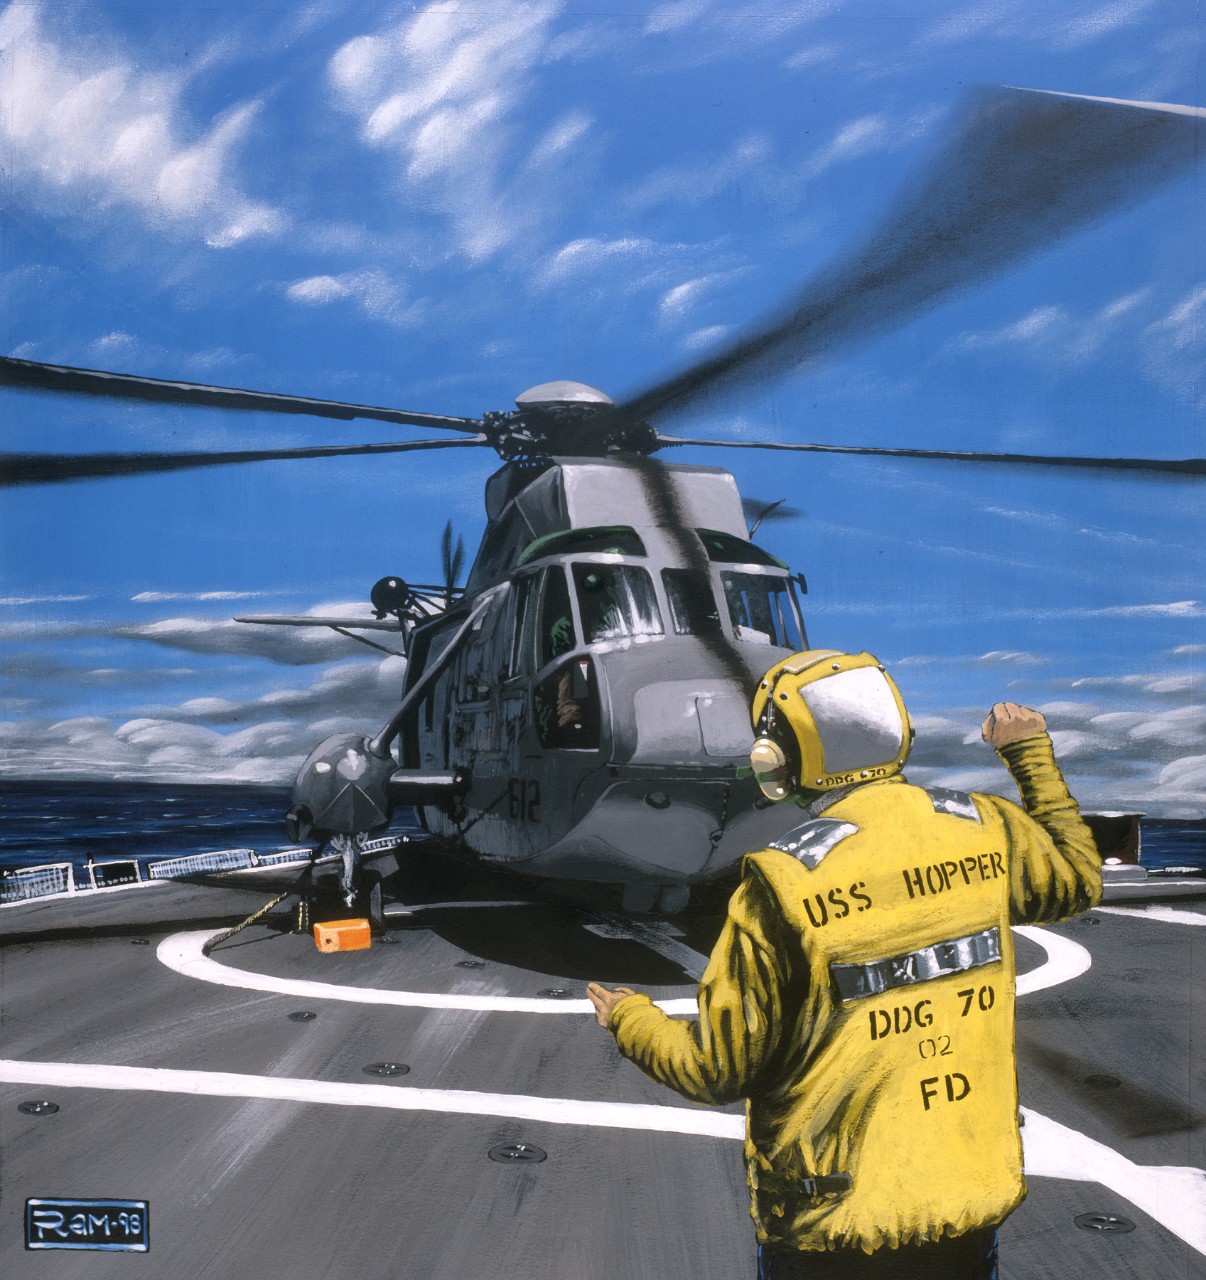 A crewman directs a helicopter on the landing pad